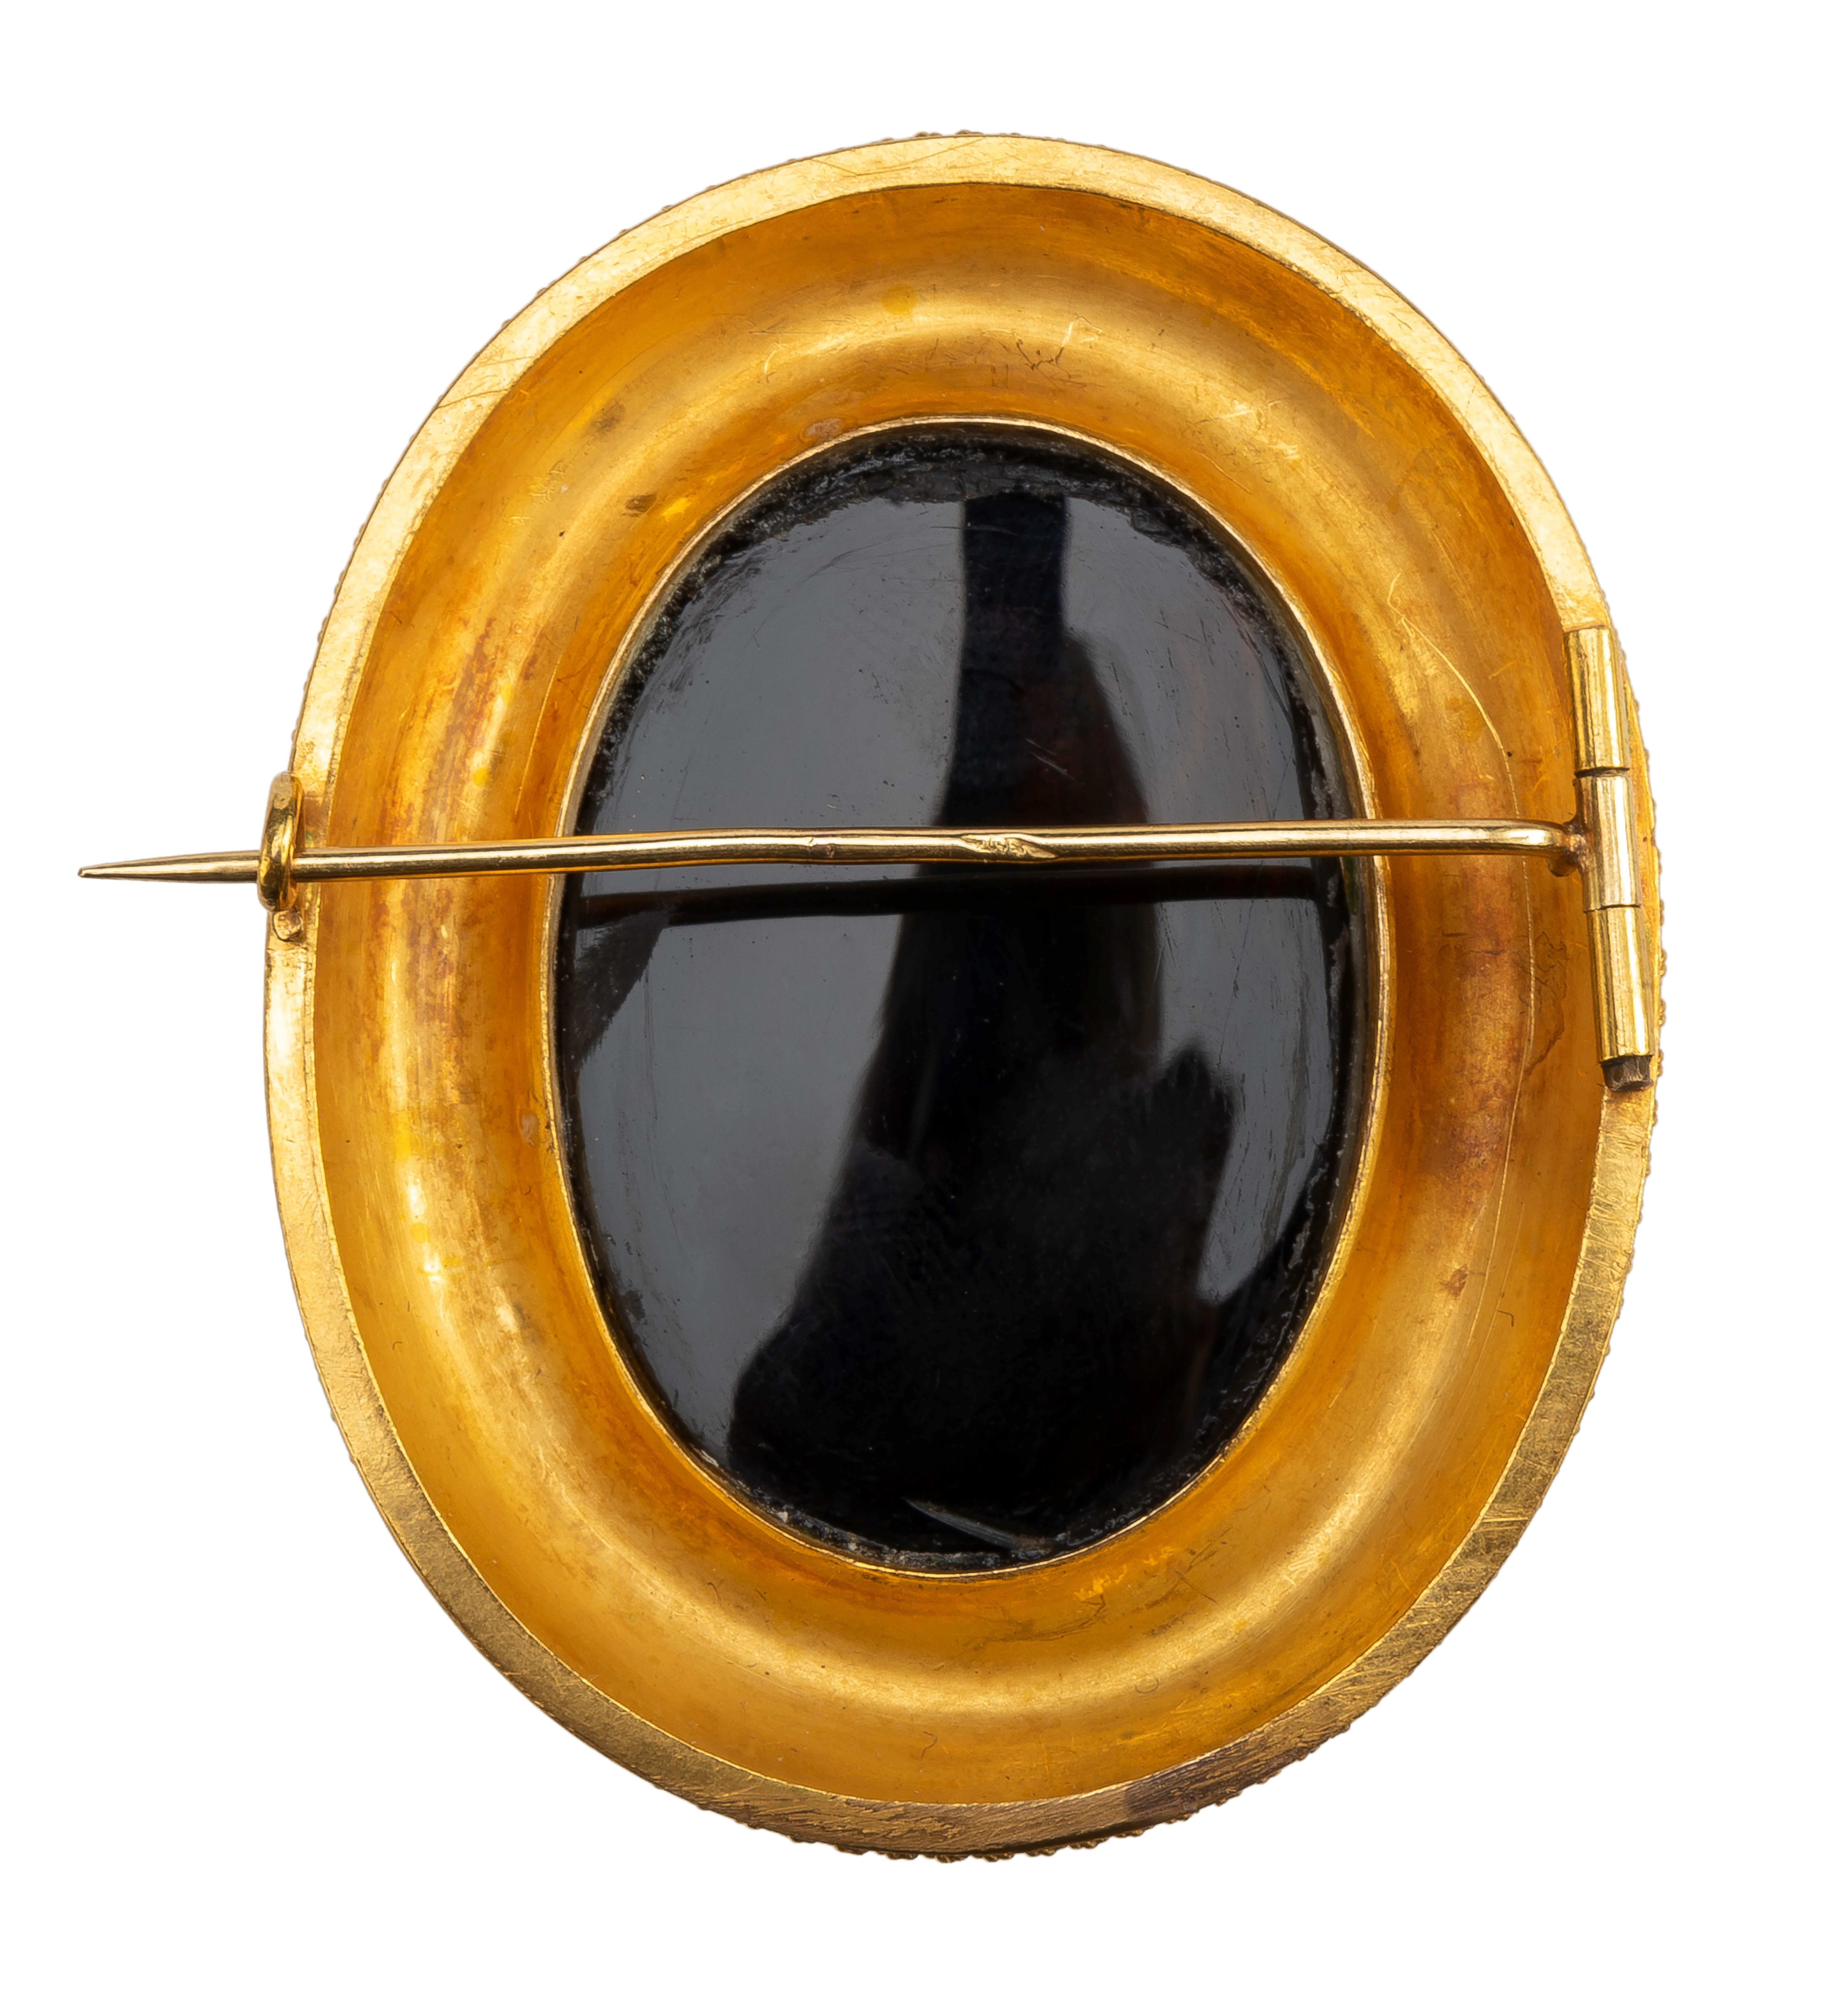 Portrait Cameo of Emperor Vespasian in a Gold Brooch
Agate, gold
Italy?, 16th century
Weight 10.2 gr.; Dimensions 48.7 × 39 mm.	

Description:
Three-layered agate cameo (black-white-brown) with a laureate head of a Roman Emperor facing left. His